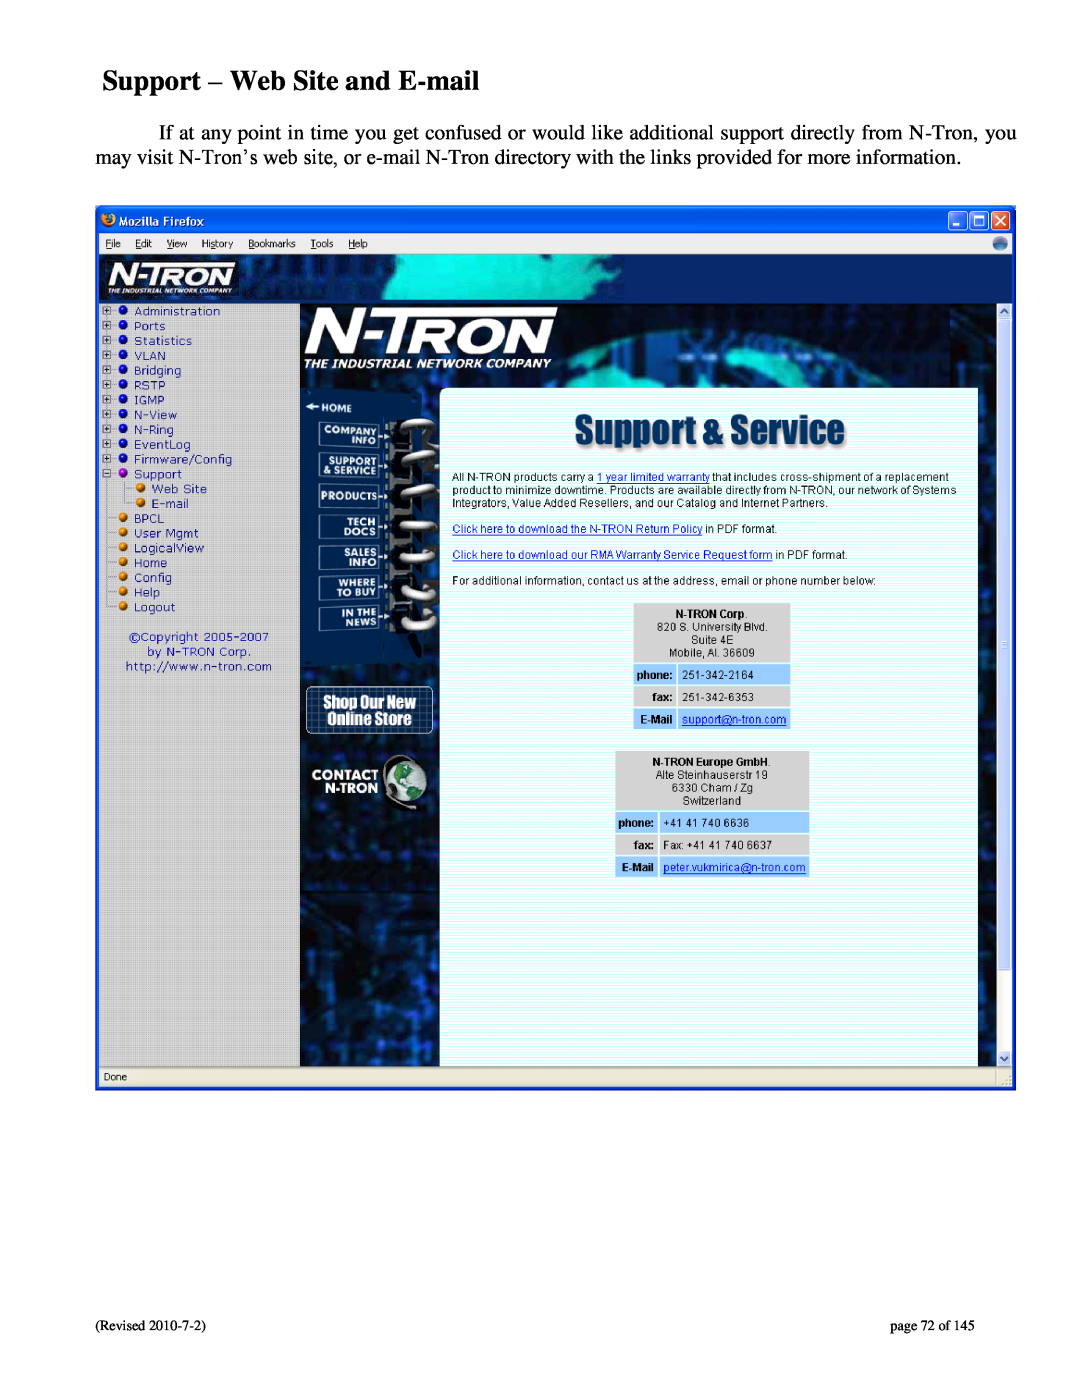 N-Tron 9000 user manual Support - Web Site and E-mail, page 72 of 